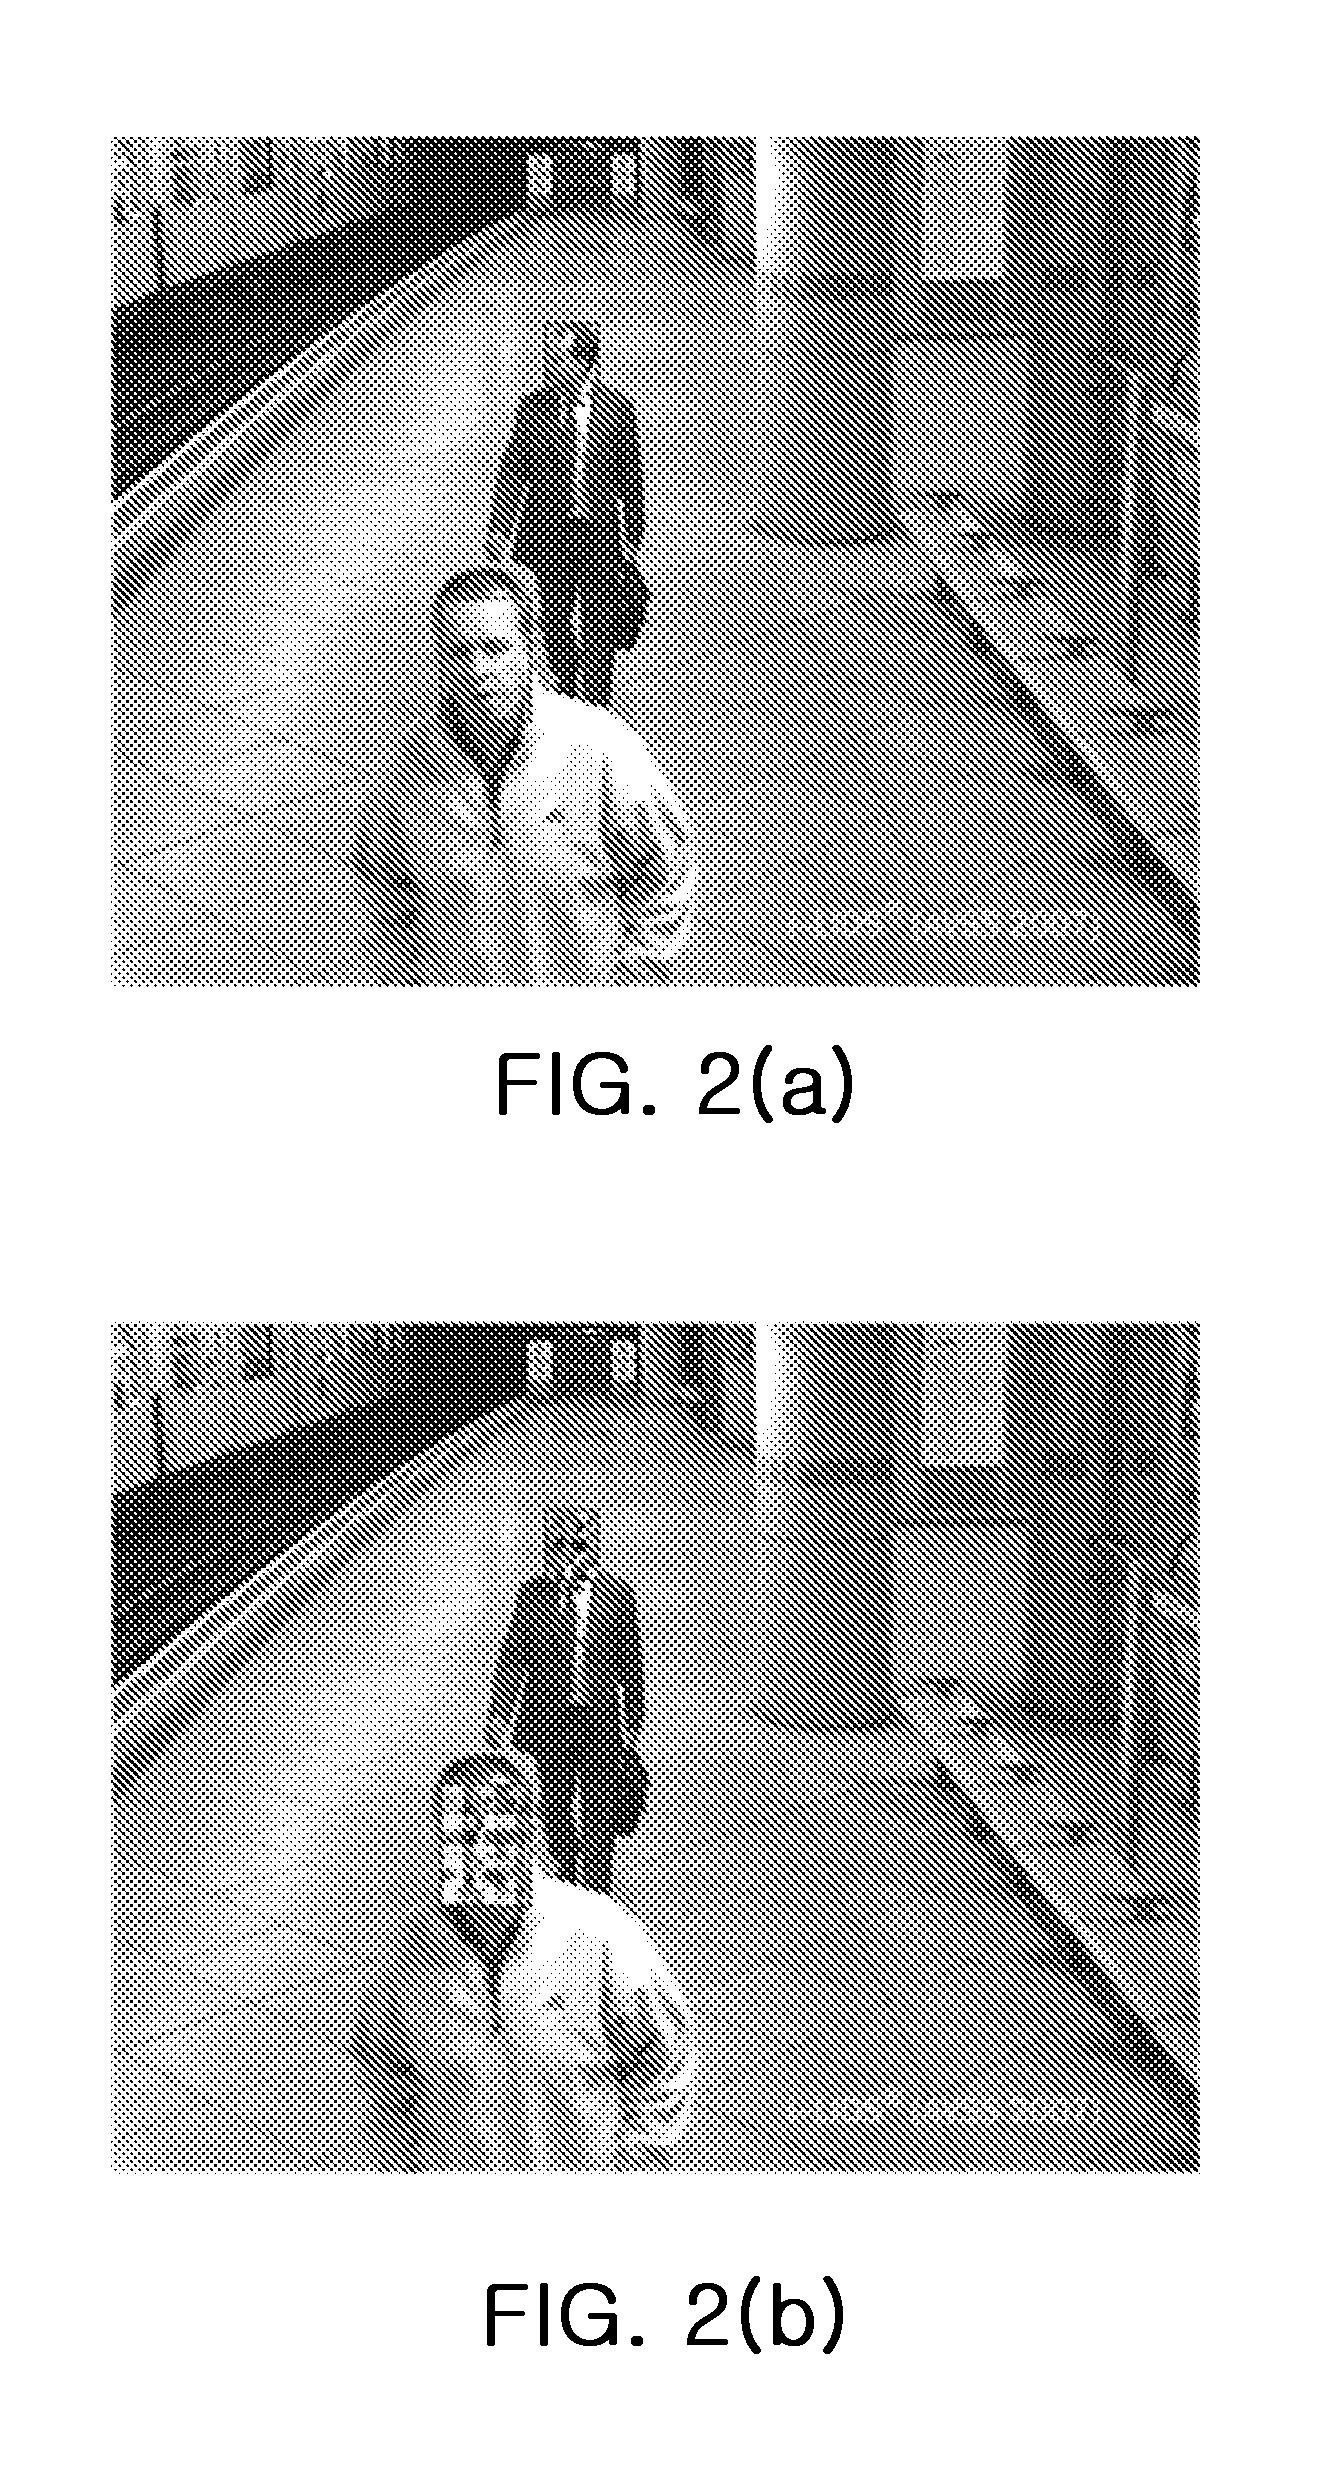 Method and apparatus for masking privacy area of image